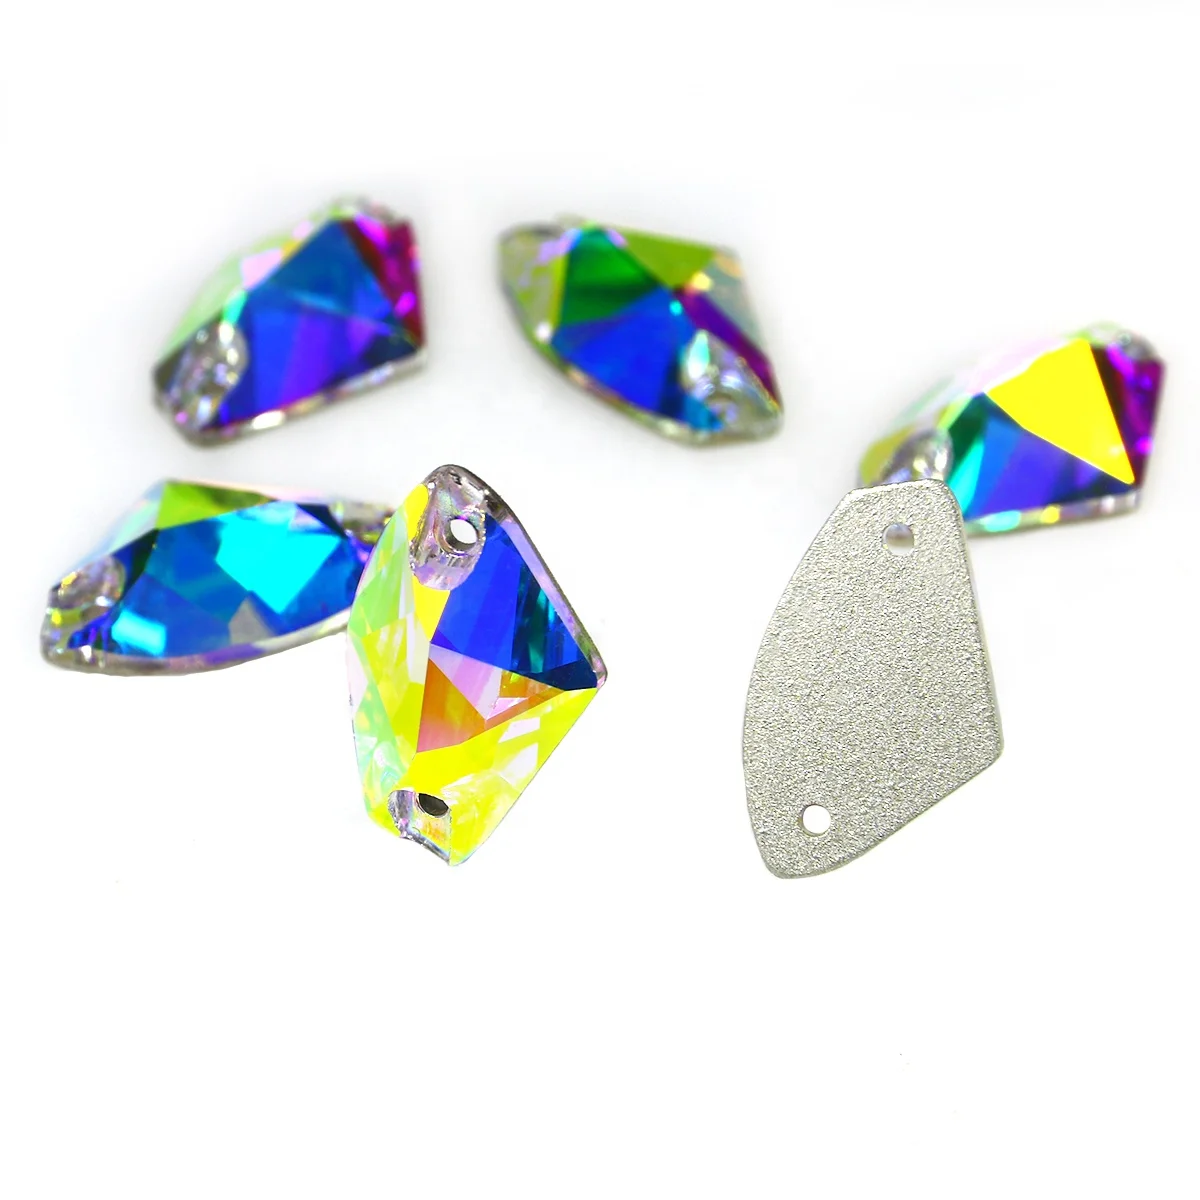 
DZ 3062 Galactic shape ab color crystal sew on rhinestones for clothes  (1600118699946)